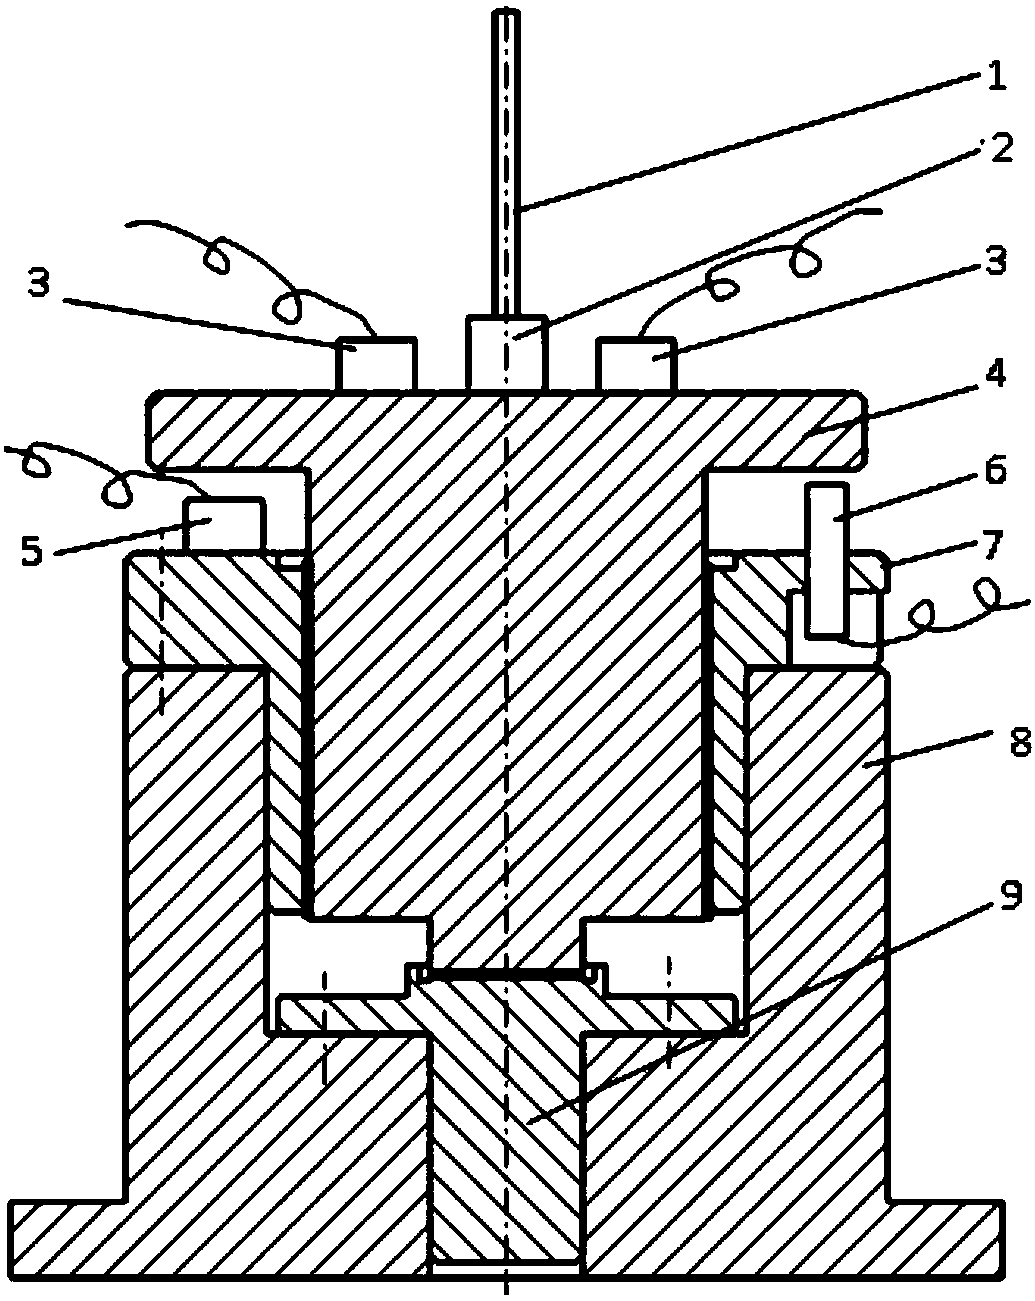 Modular oil film damping test device and method